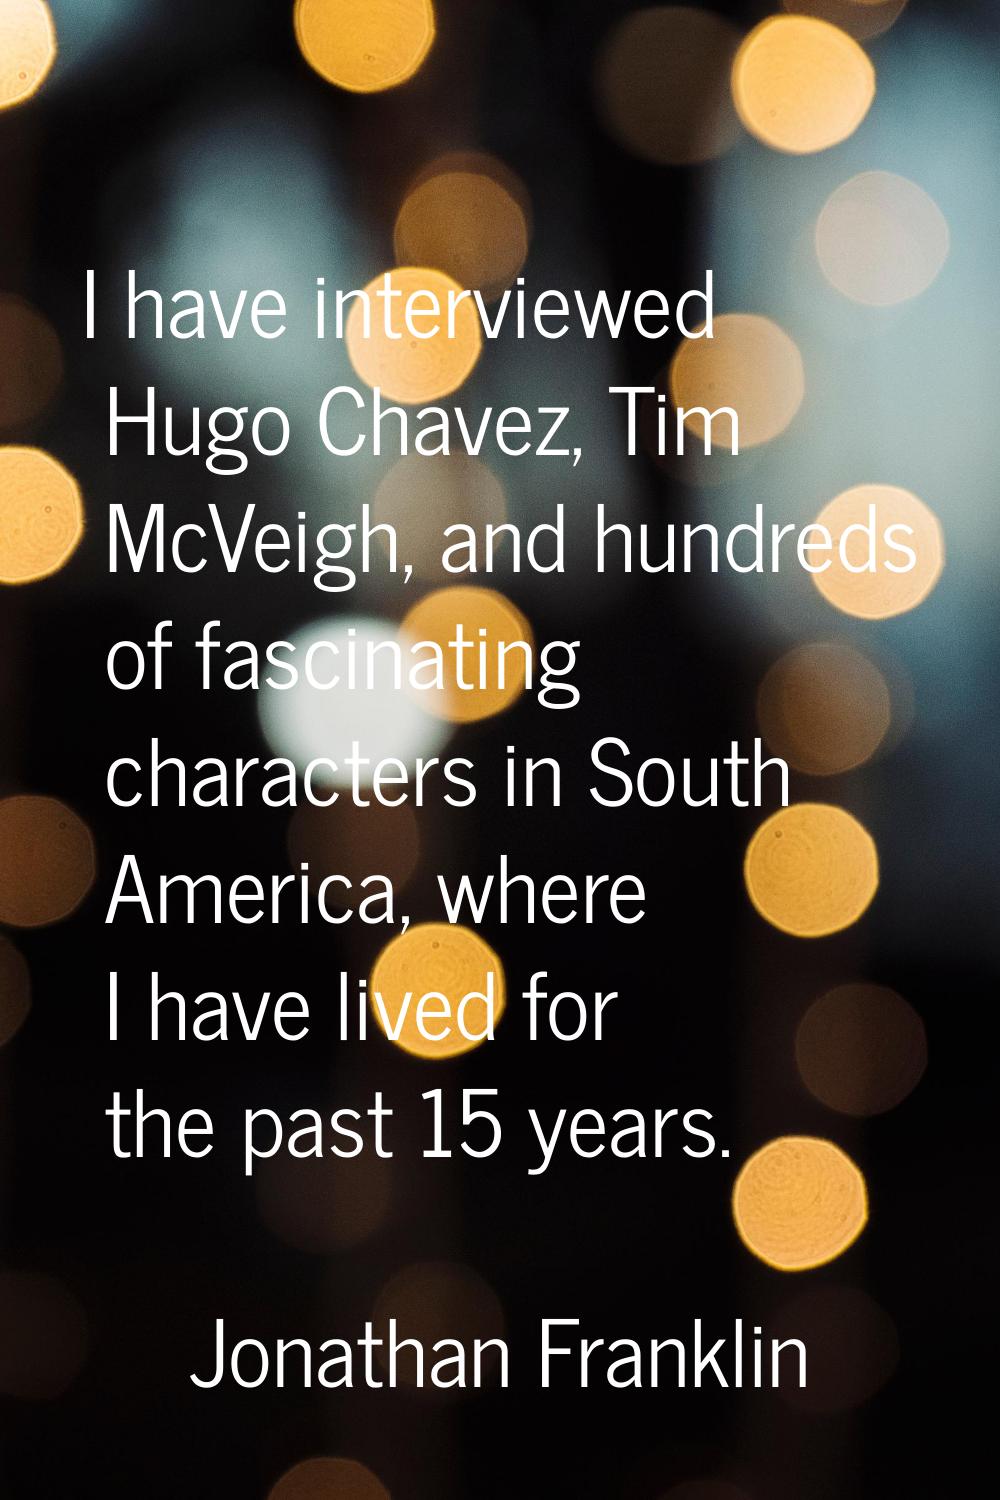 I have interviewed Hugo Chavez, Tim McVeigh, and hundreds of fascinating characters in South Americ